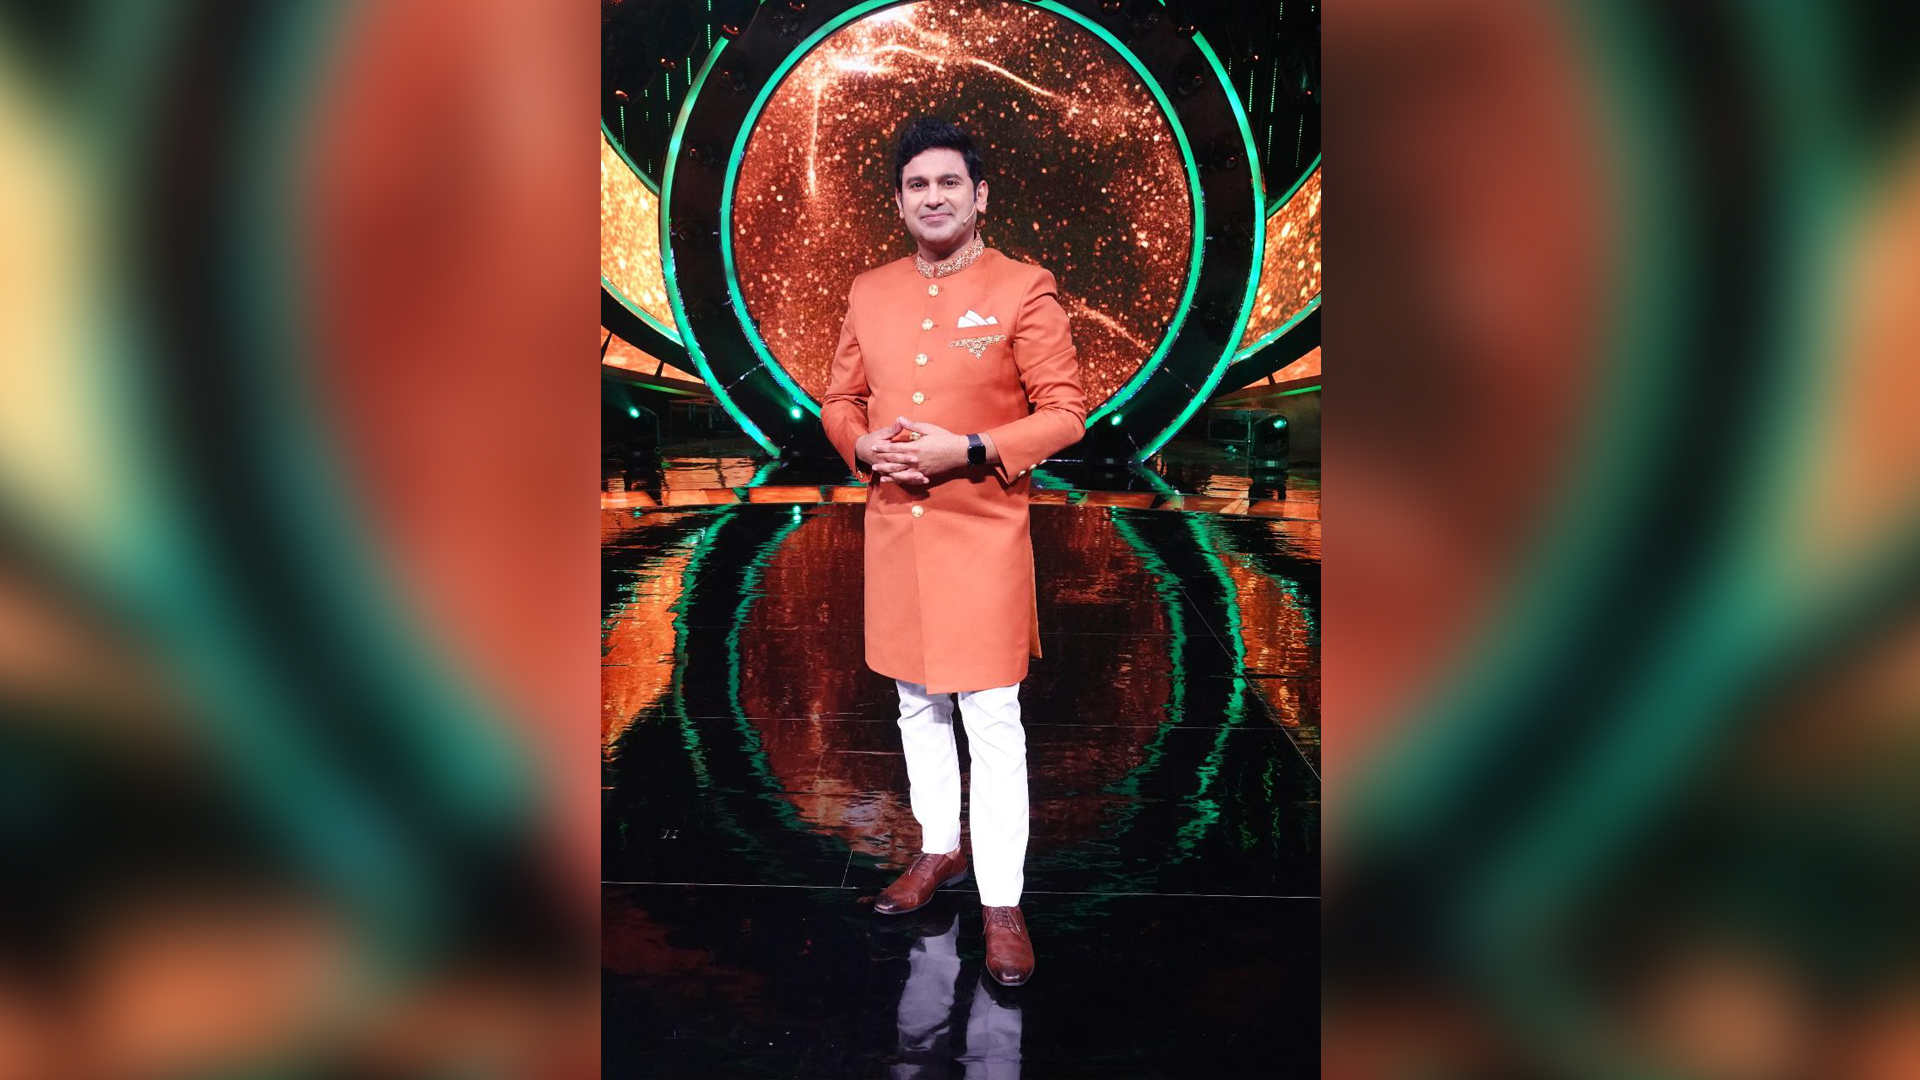 I was born barely 60 miles away from the place where Ram was born says, Manoj Mutanshir on the sets of Indian Idol season 12